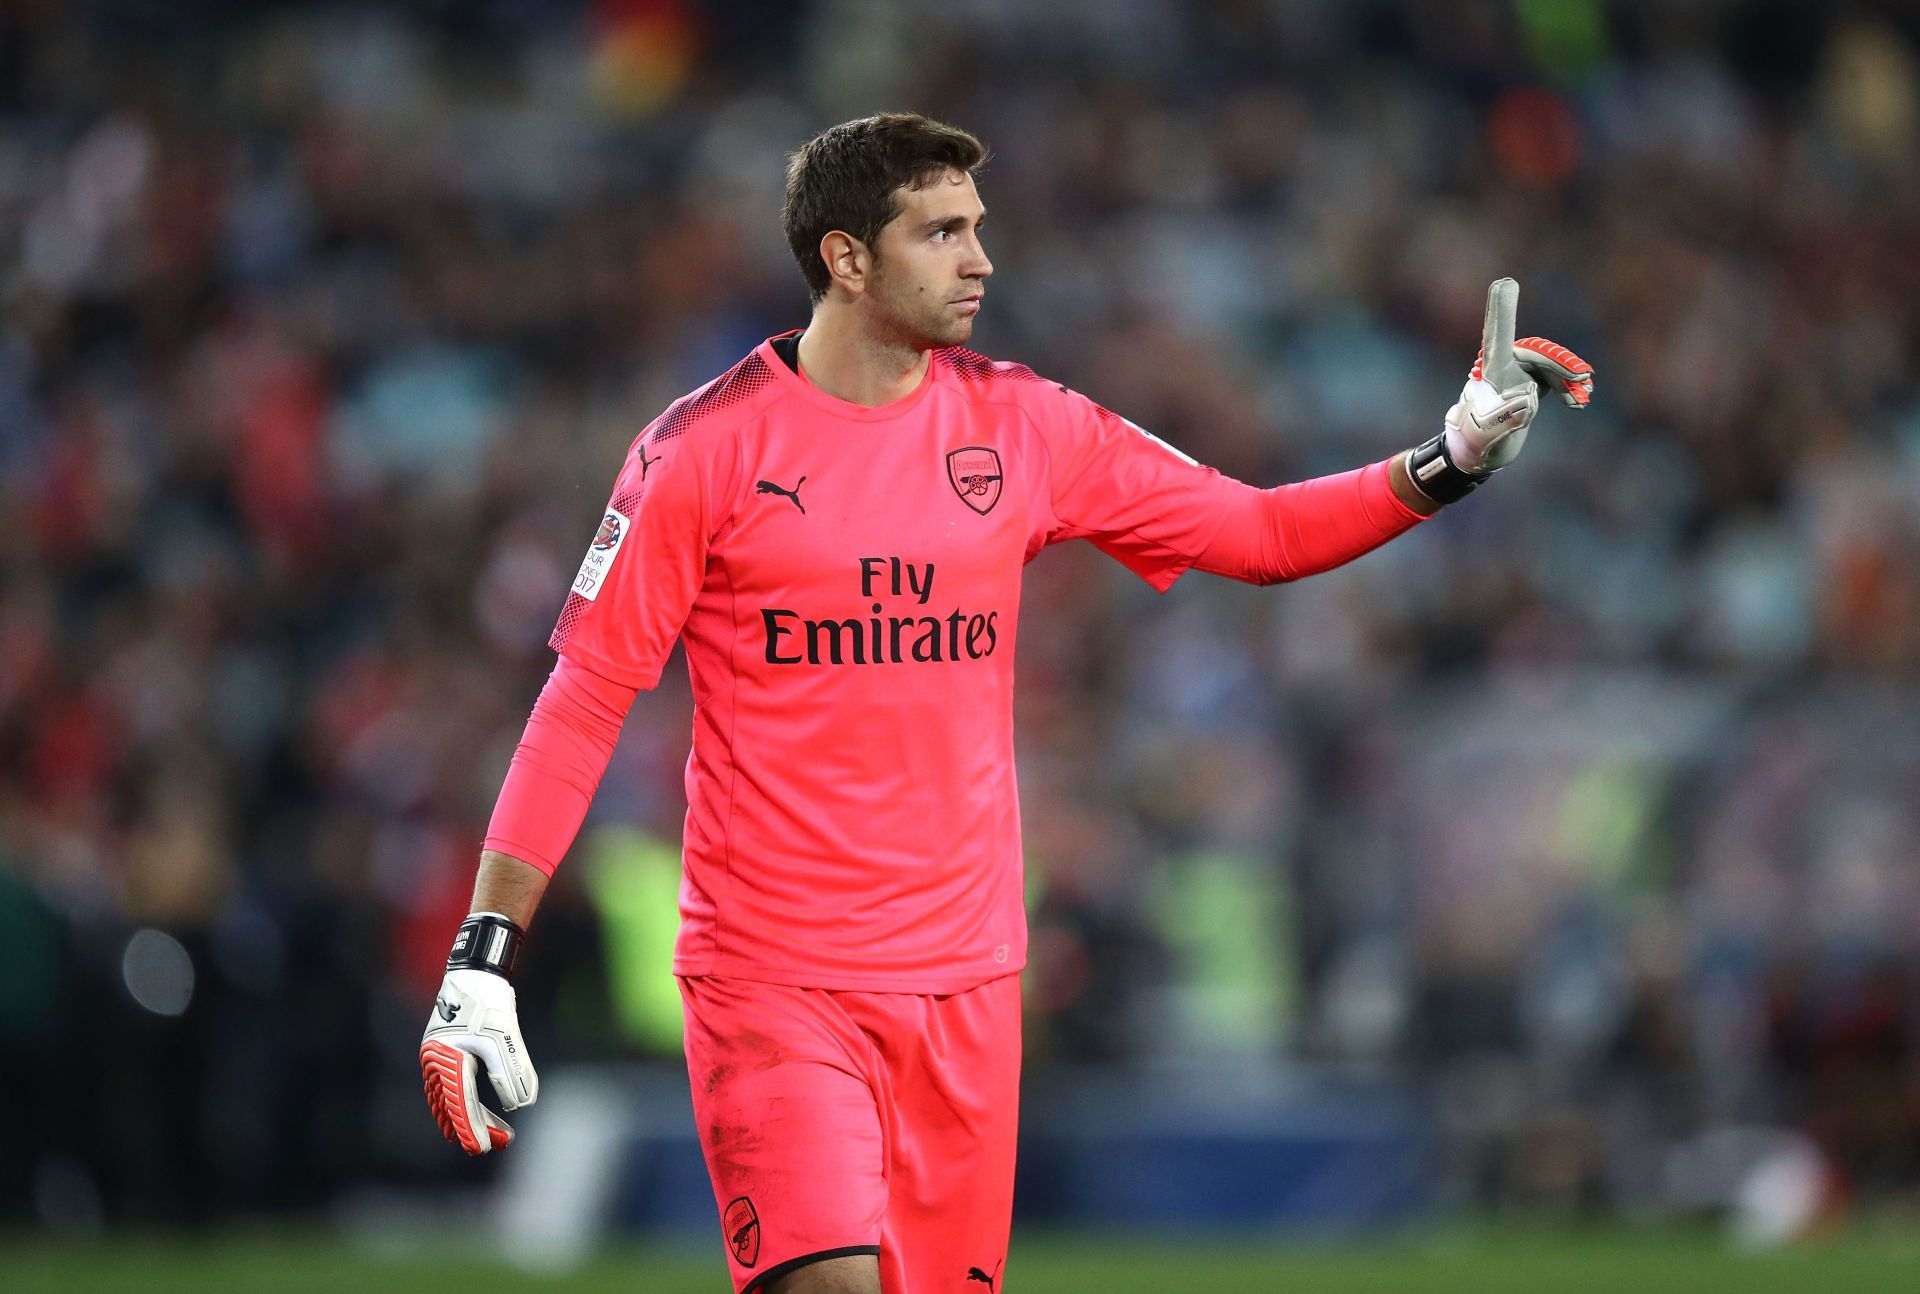 Emiliano Martinez wants win his first FIFA World Cup with Argentina.